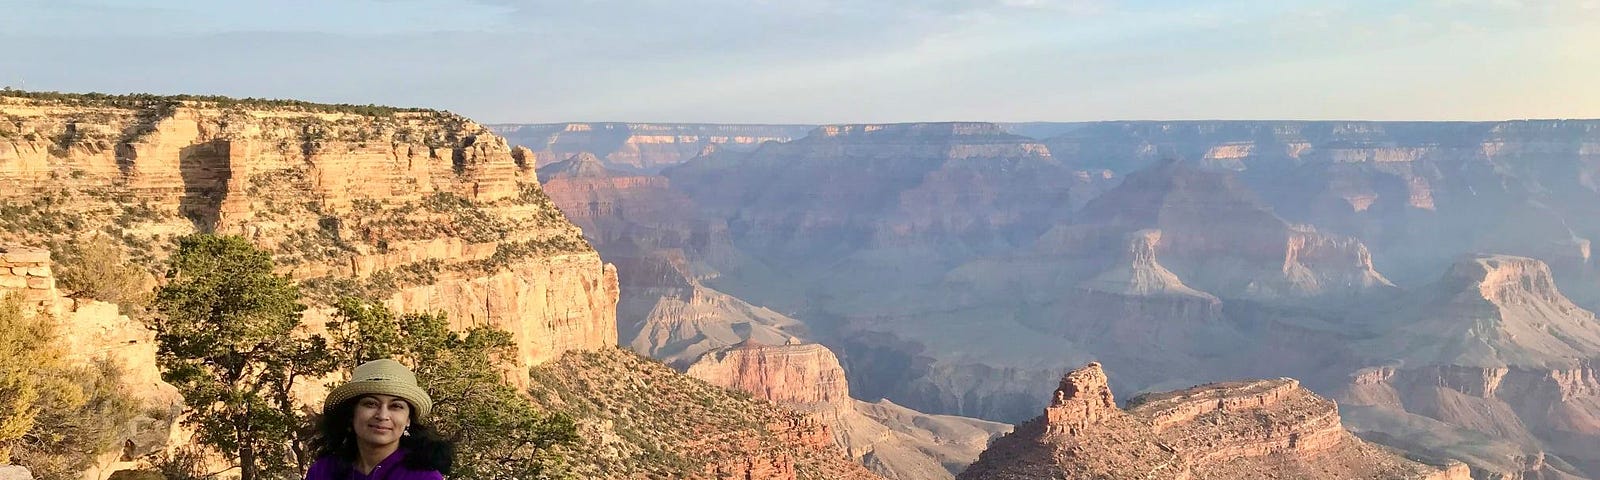 Author by the ledge overlooking the Grand Canyon at sunrise.